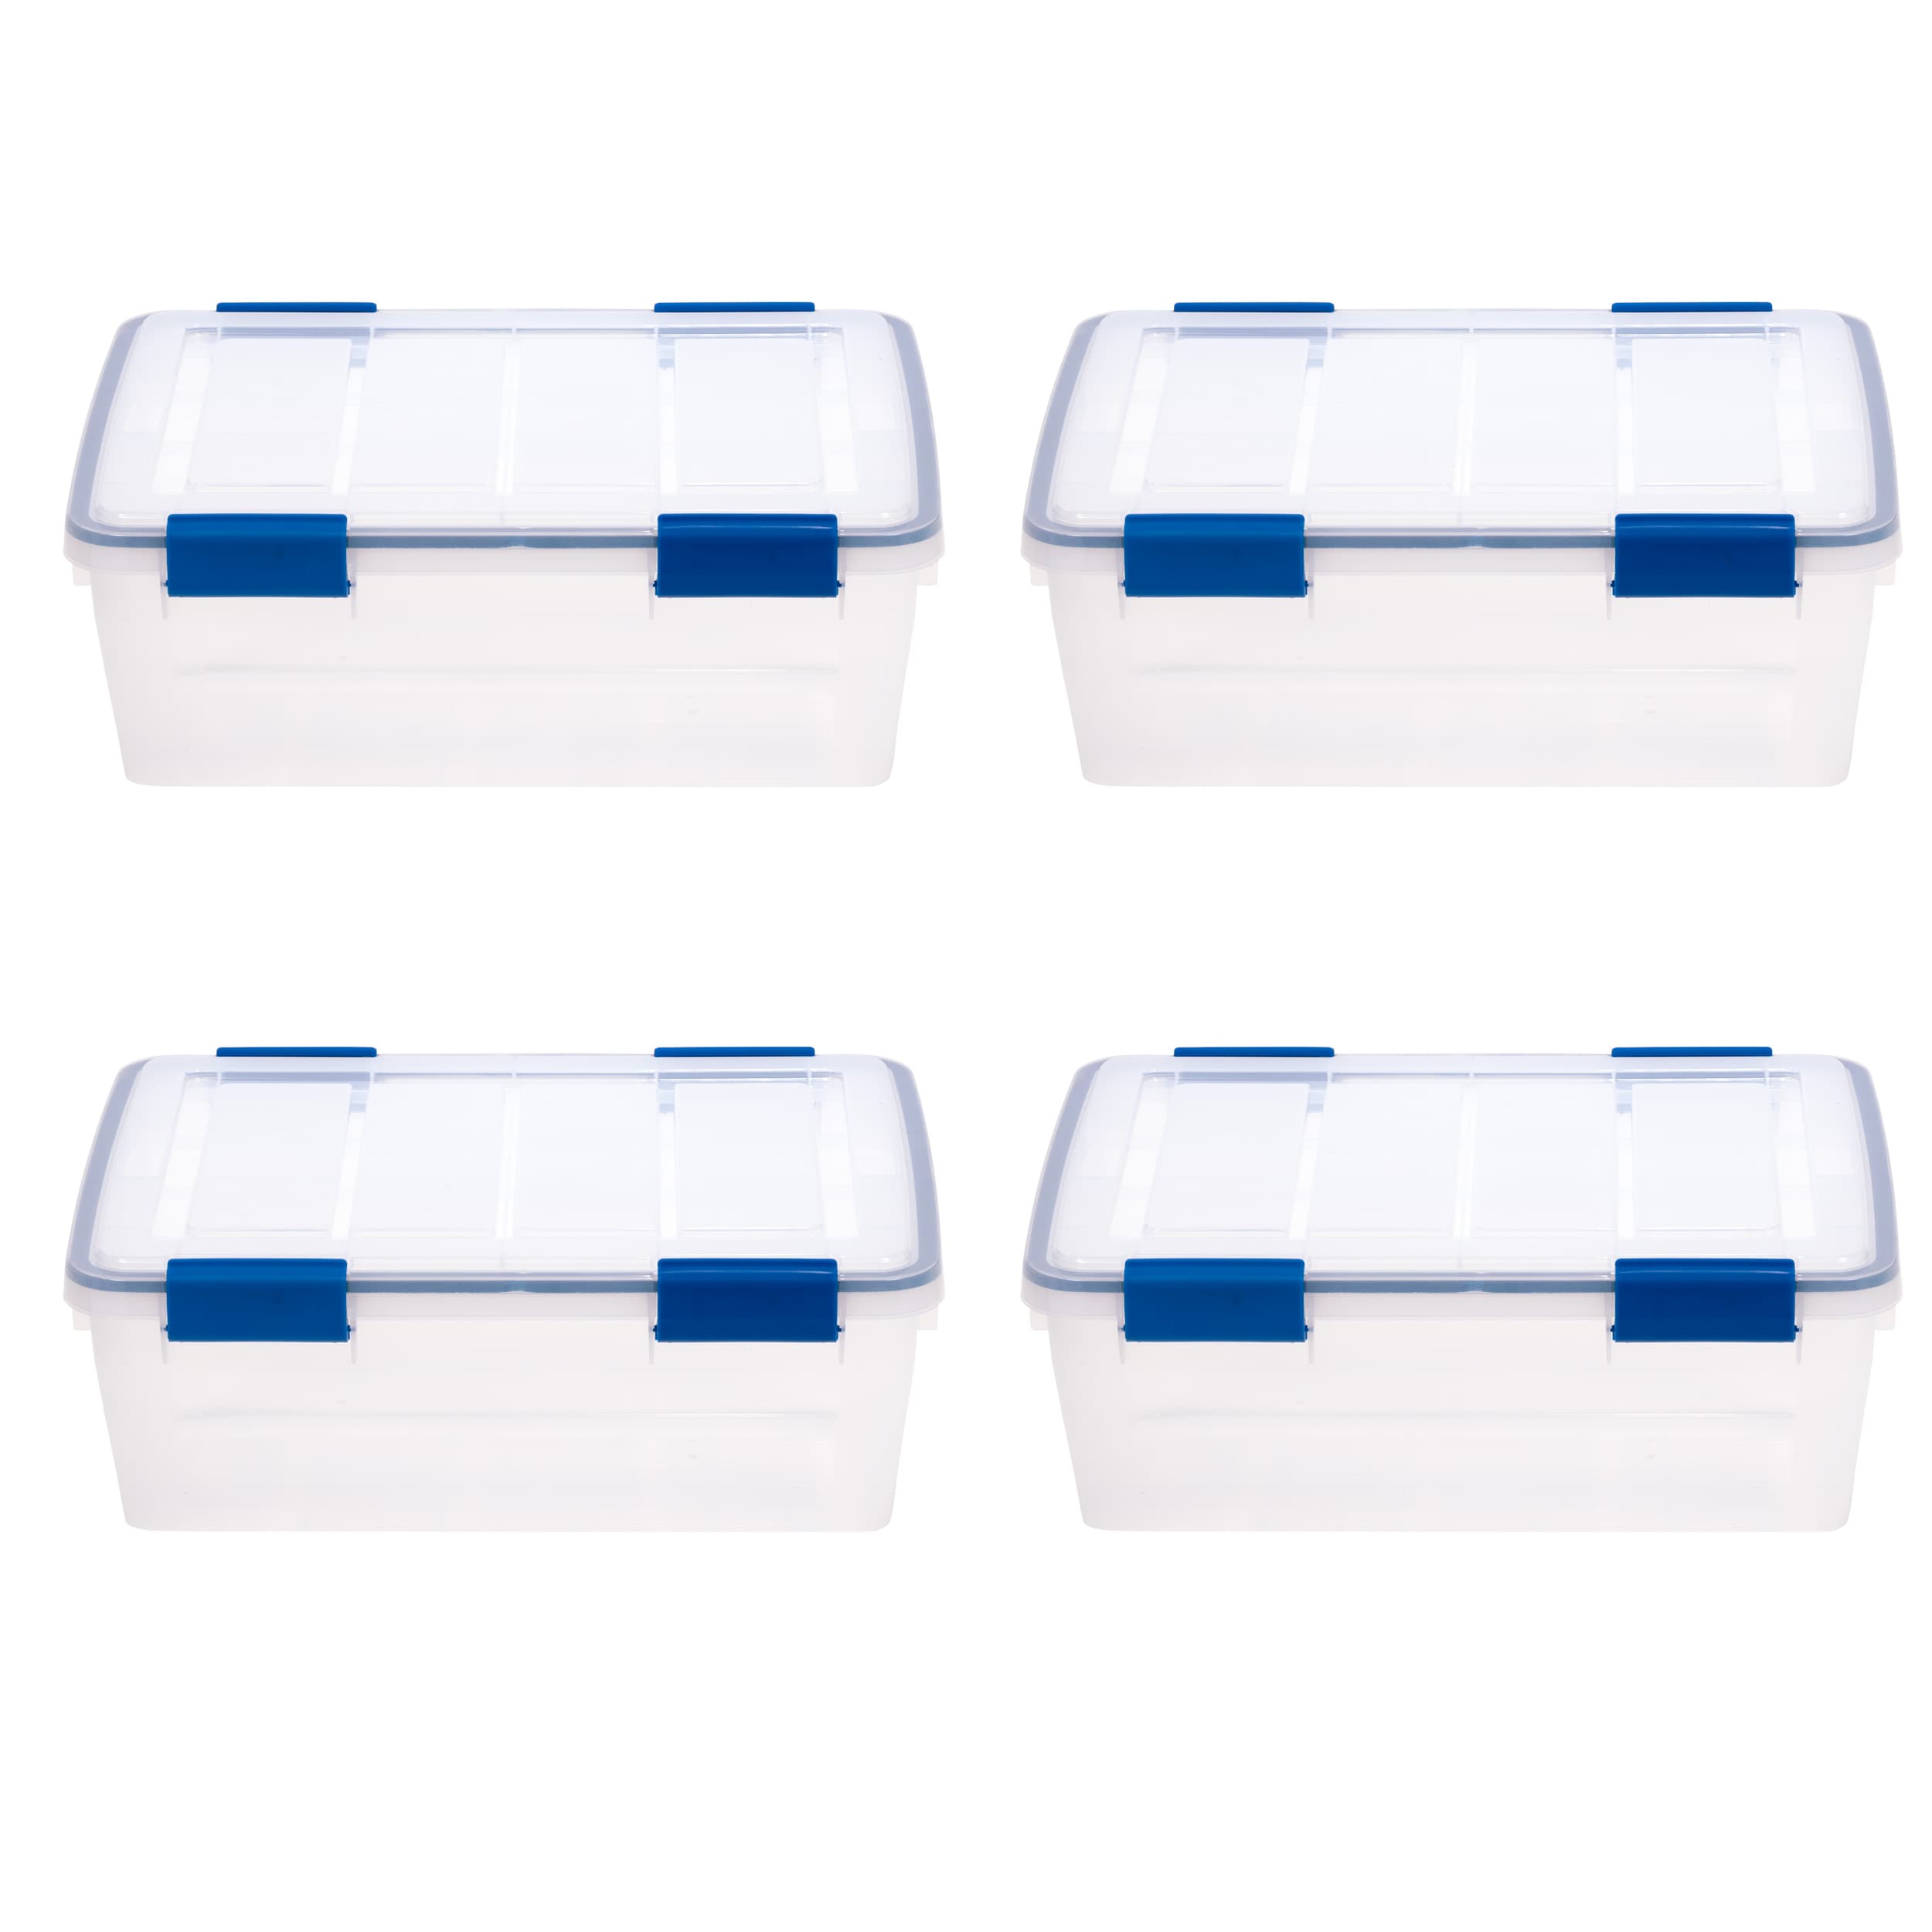 The Holiday Aisle® 4-Pack Clear Printed Storage Totes With Lids (Patrotic  Balloons), 14.5-Gal (58-Quart) Capacity, Colorful Designs On 24” X 17” X  13” Bins, Printed Transparent Containers